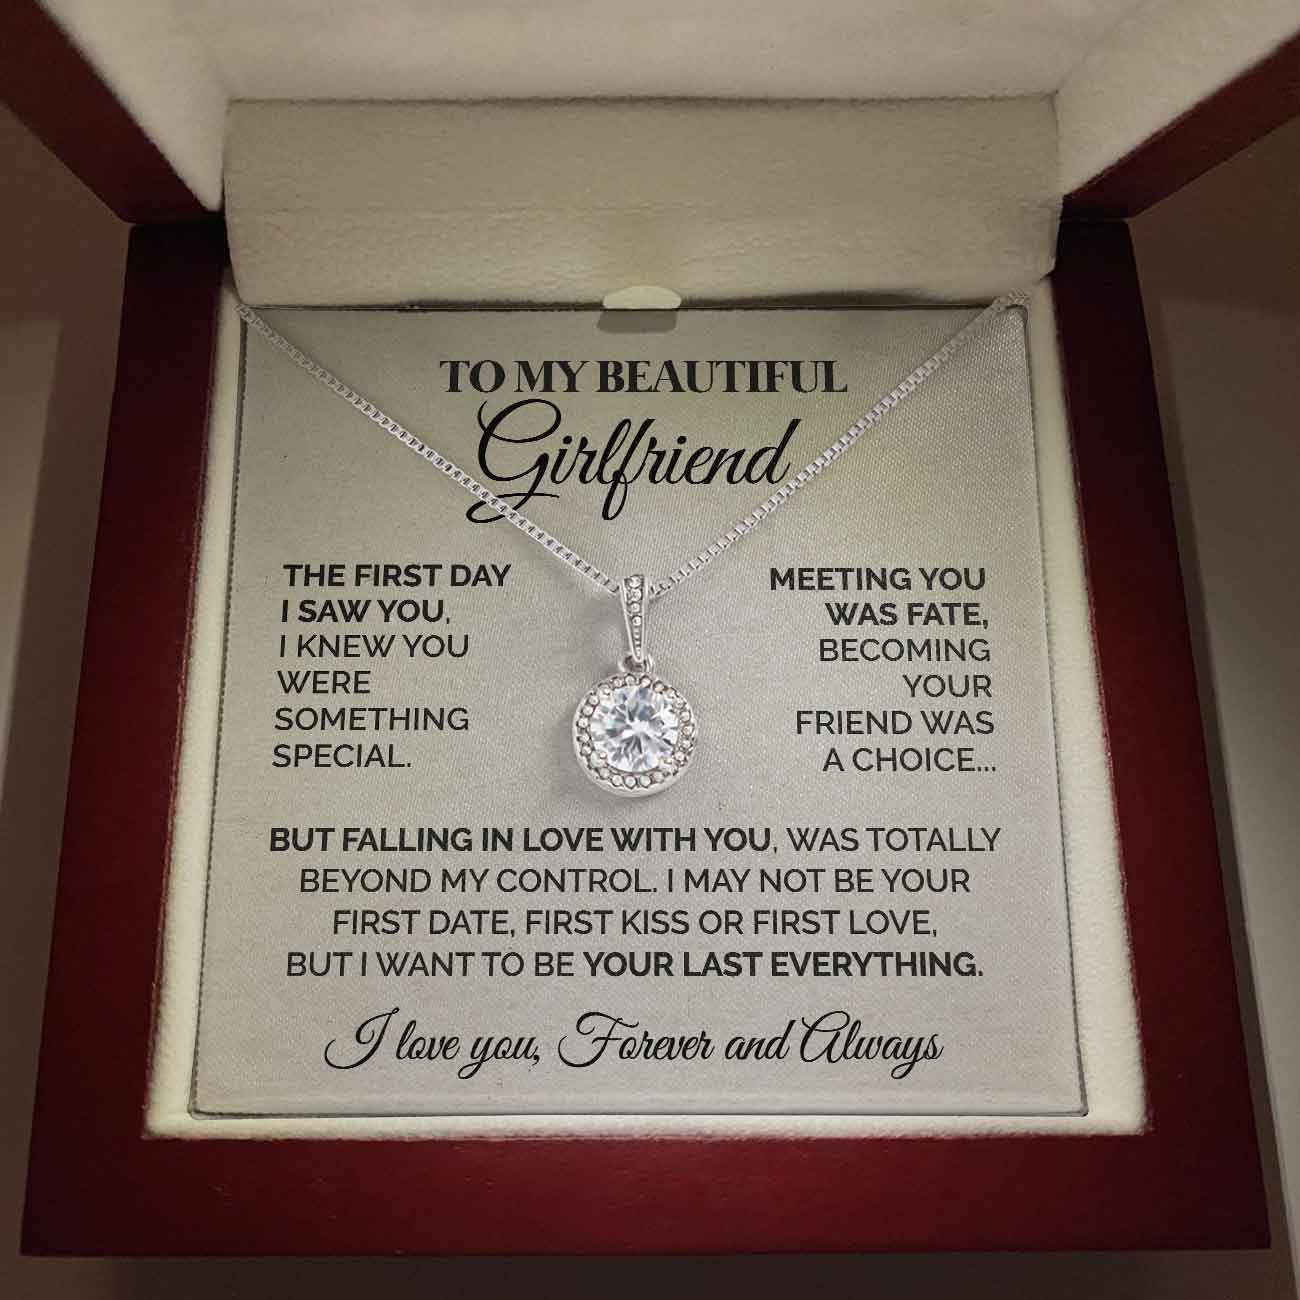 ShineOn Fulfillment Jewelry Mahogany Style Luxury Box To My Beautiful Girlfriend - The First Day I Saw You - Eternal Hope Necklace